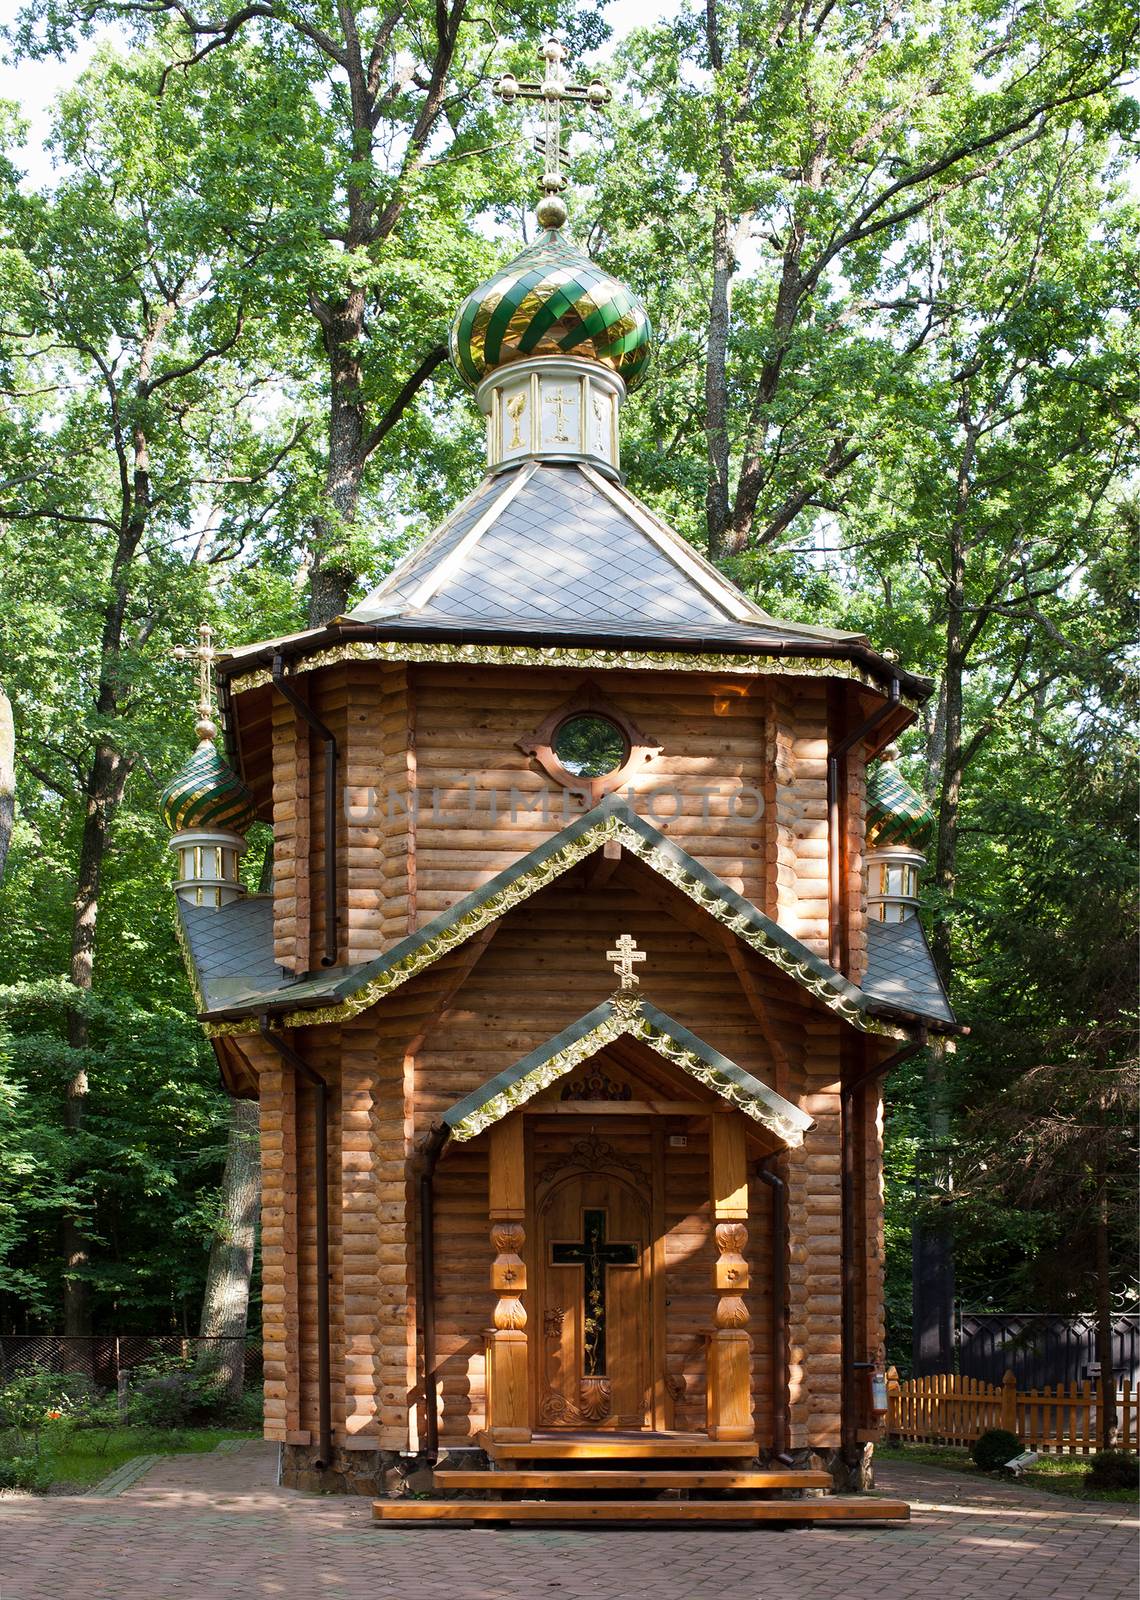 General view of a two-story log house of prayer in the woods